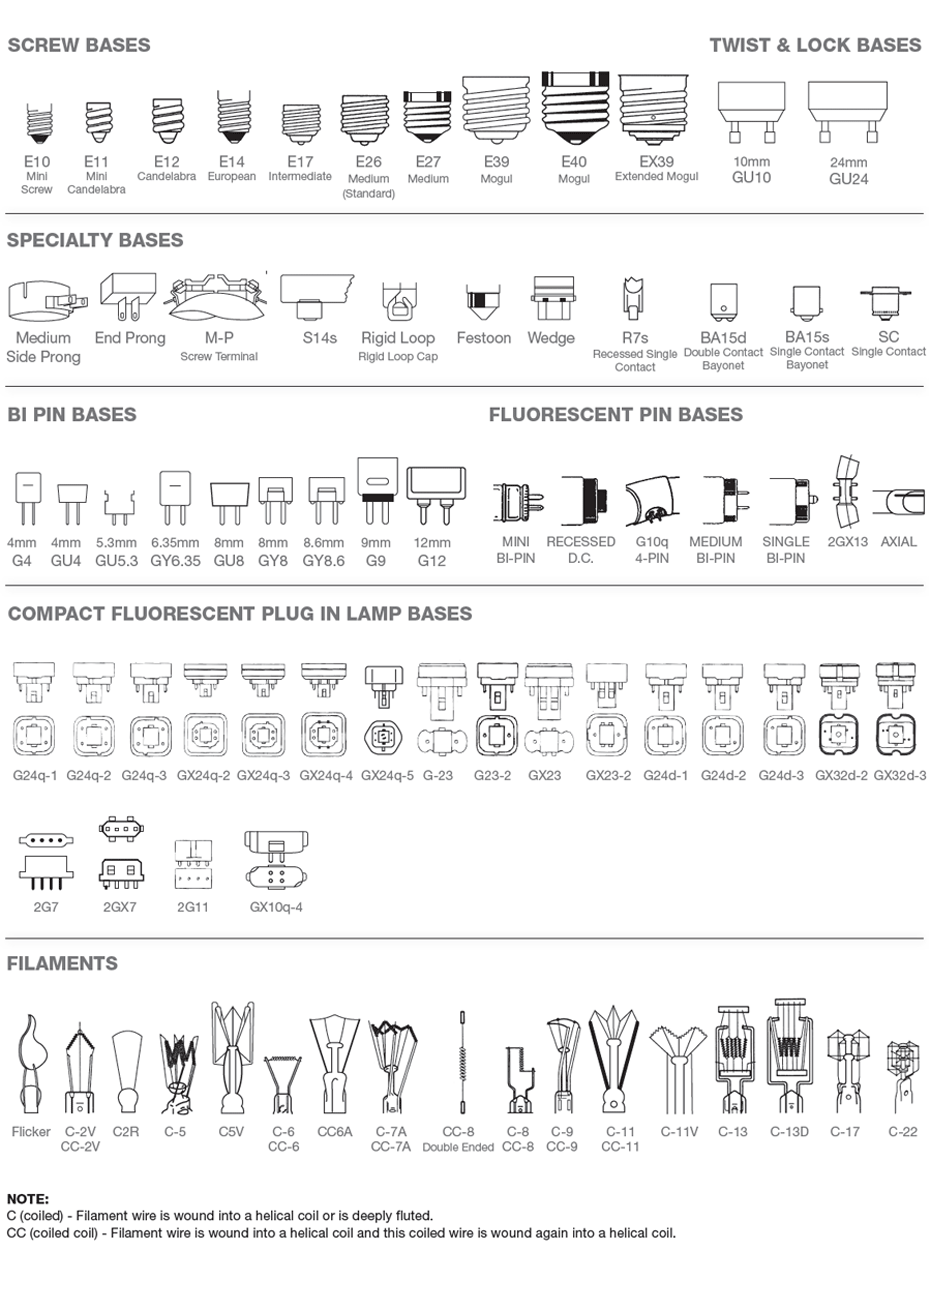 Bulb Shapes and Sizes & Filament Types